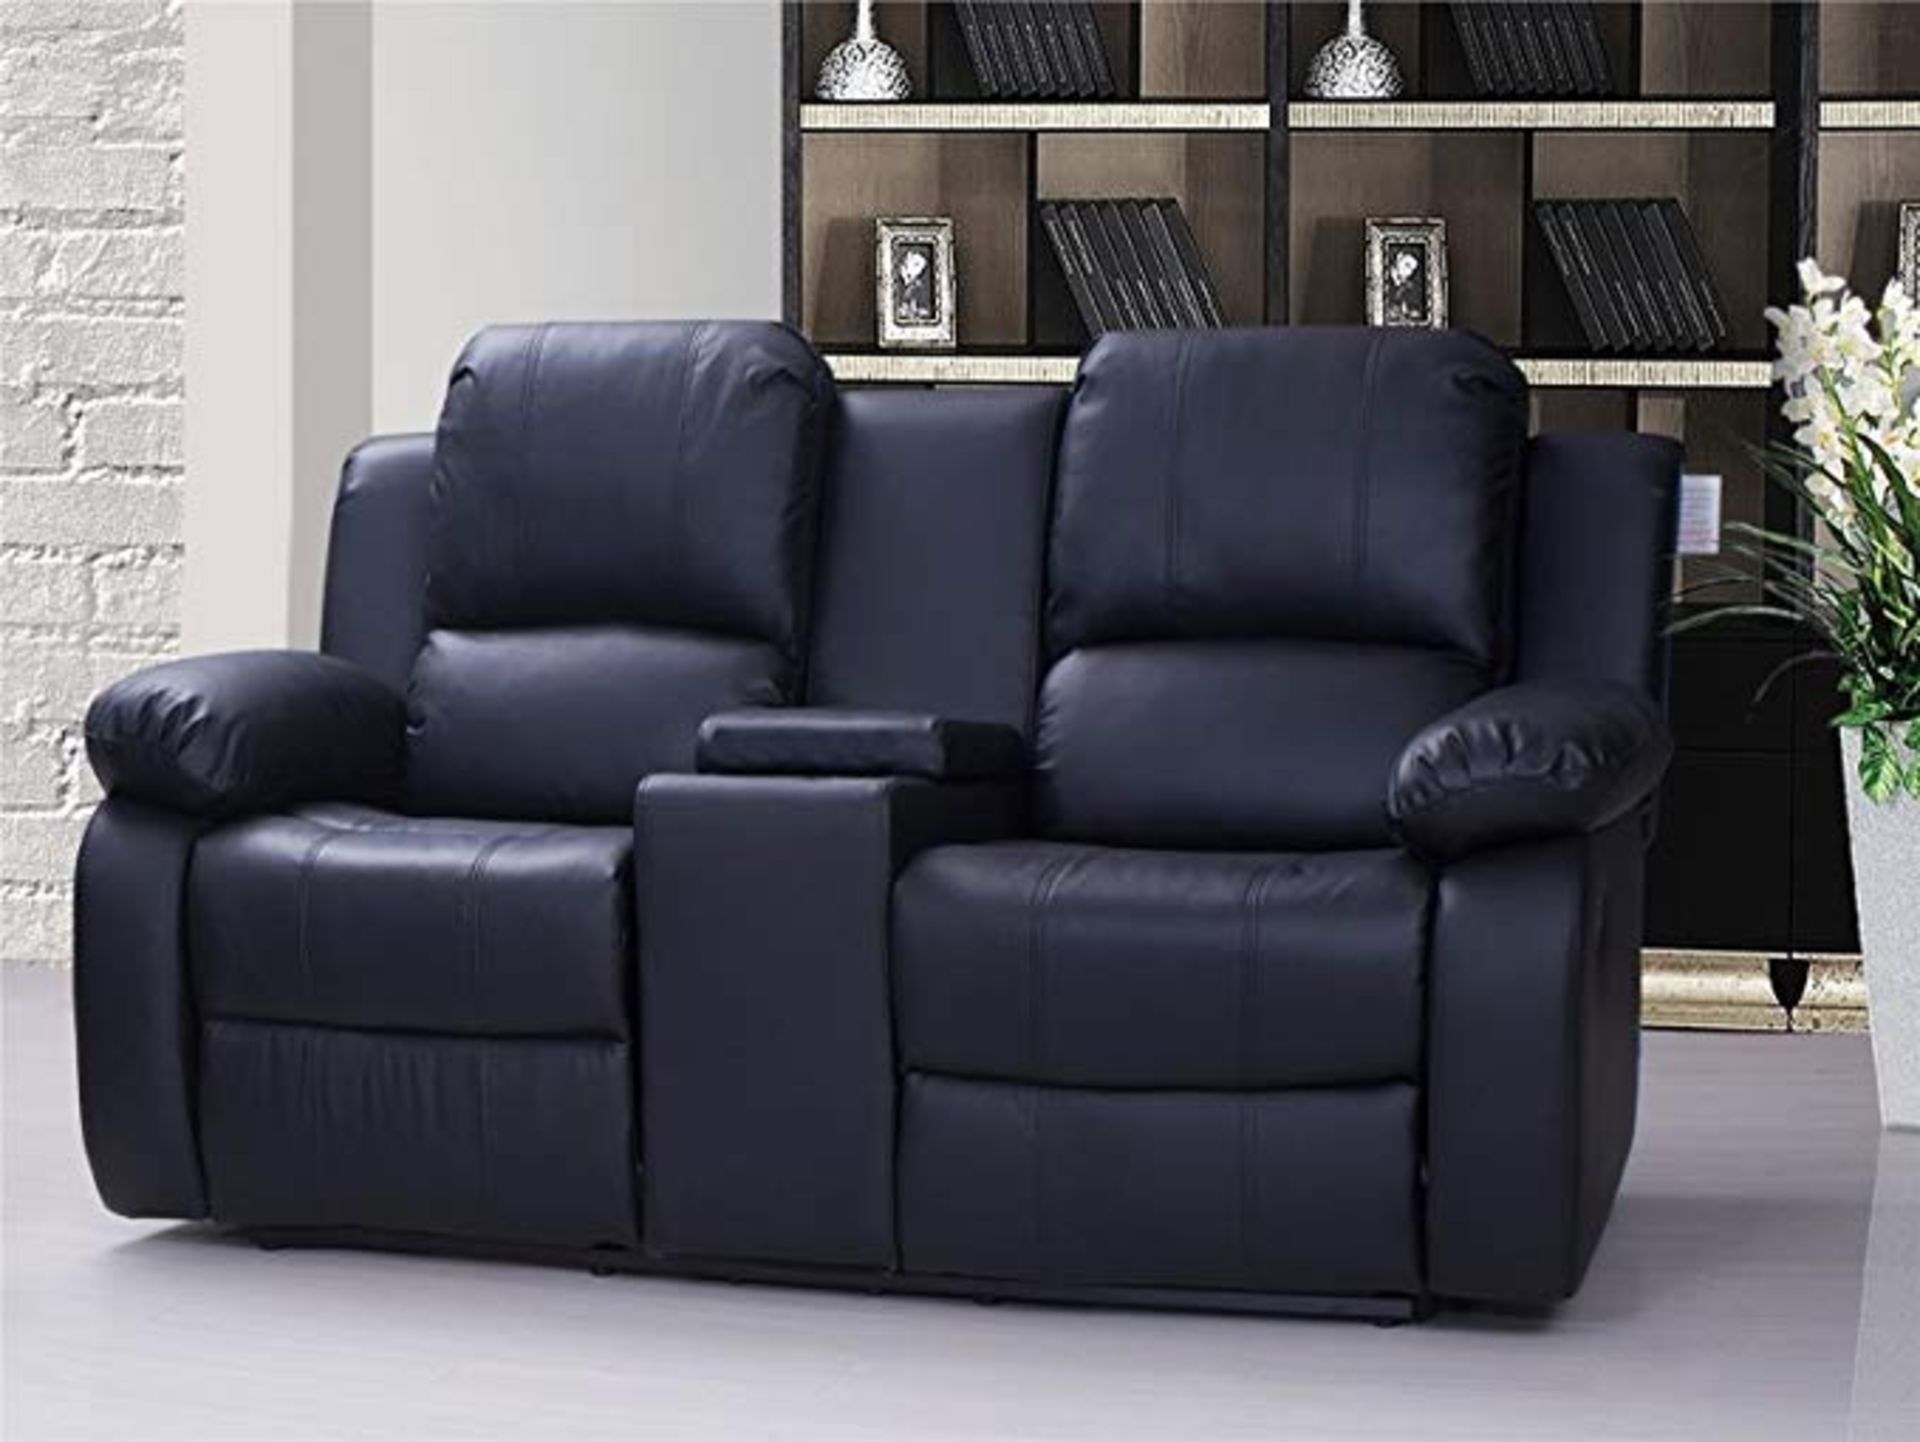 Brand New Boxed 2 Seater Electric Reclining Supreme Sofa With Console